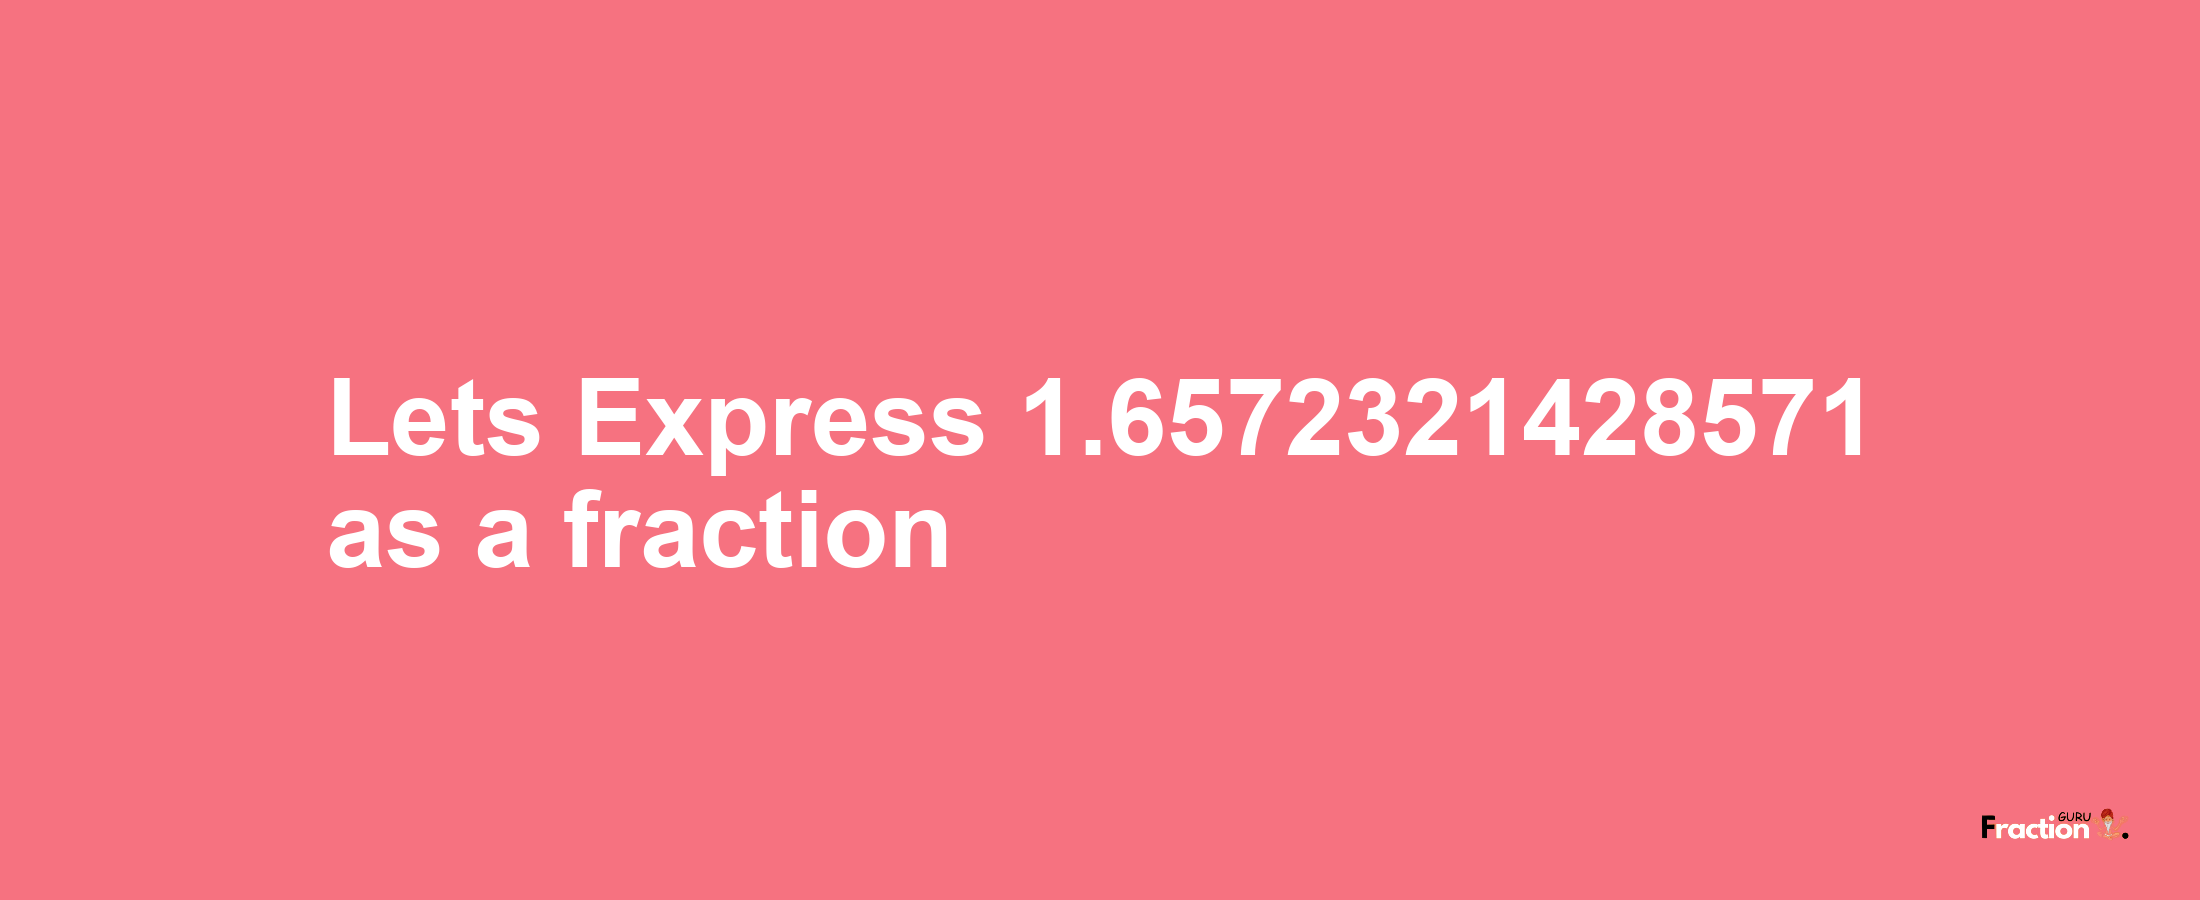 Lets Express 1.6572321428571 as afraction